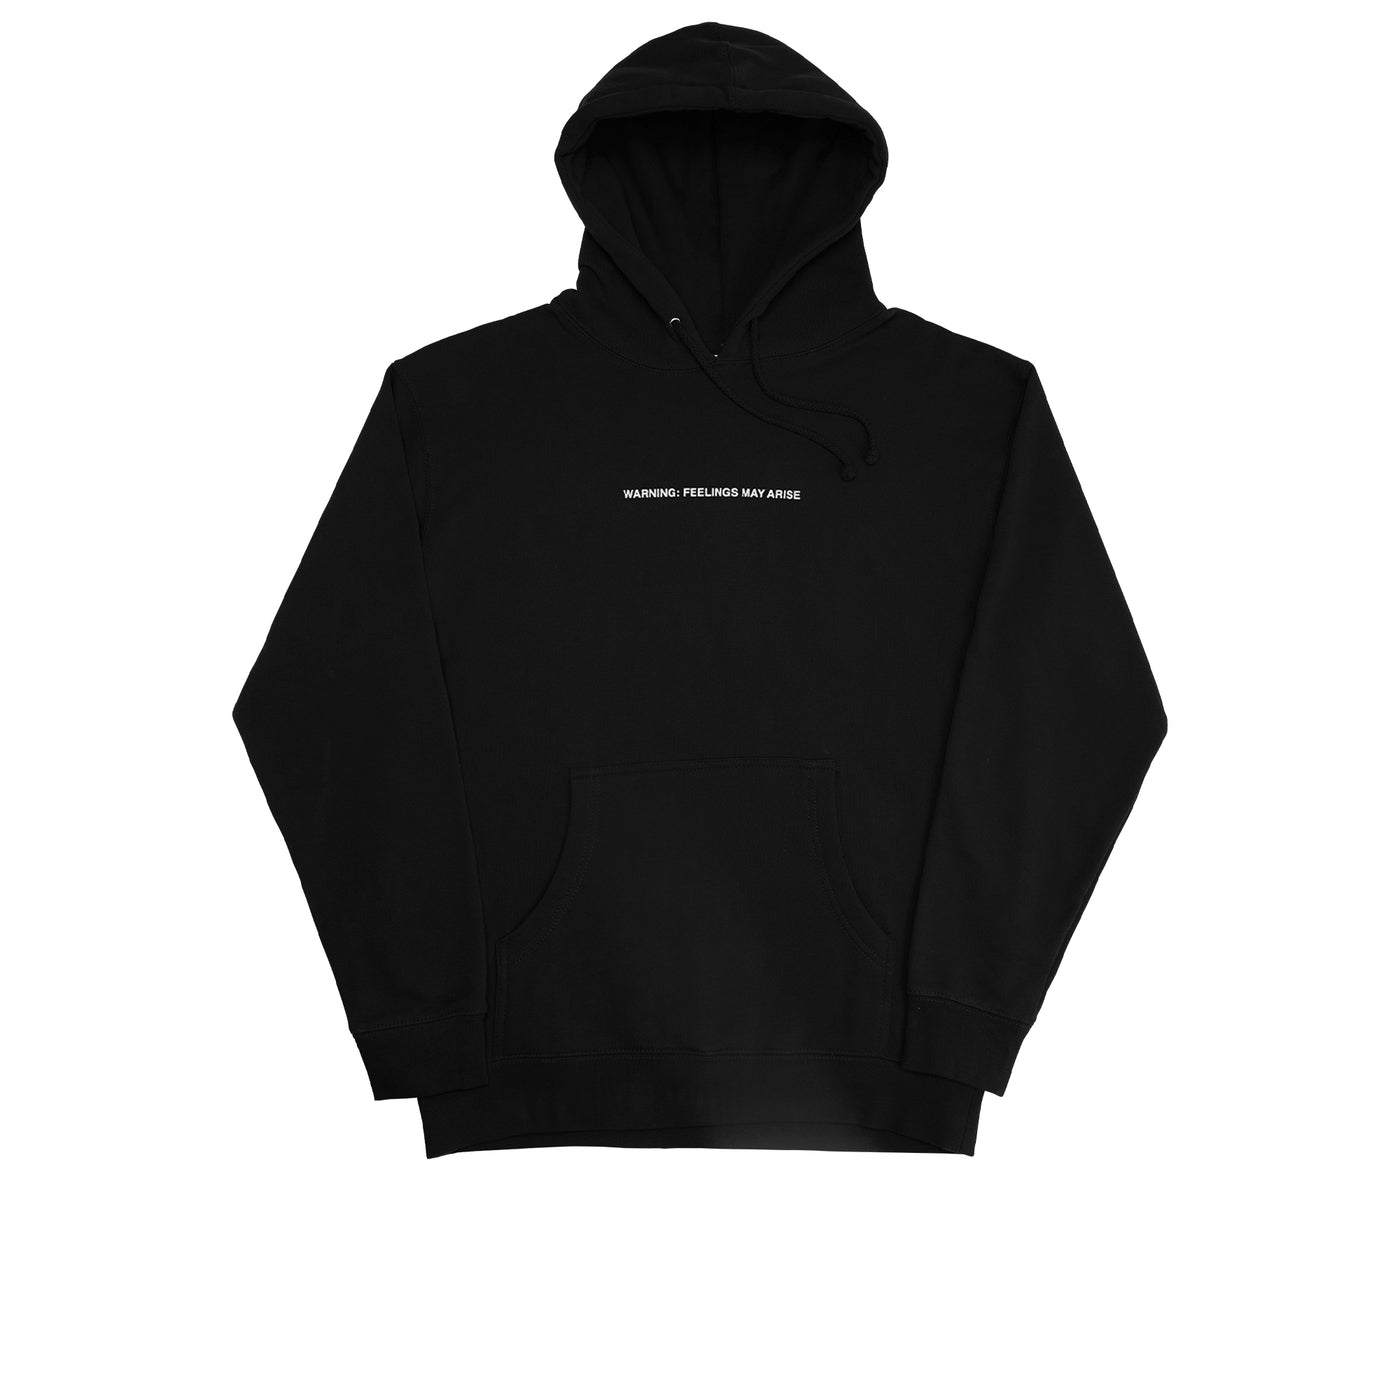 We're Not Really Strangers Mental Health Awareness Month. Front view of Black How Are You Really Hoodie with centered white font reading "Warning: Feelings May Arise".